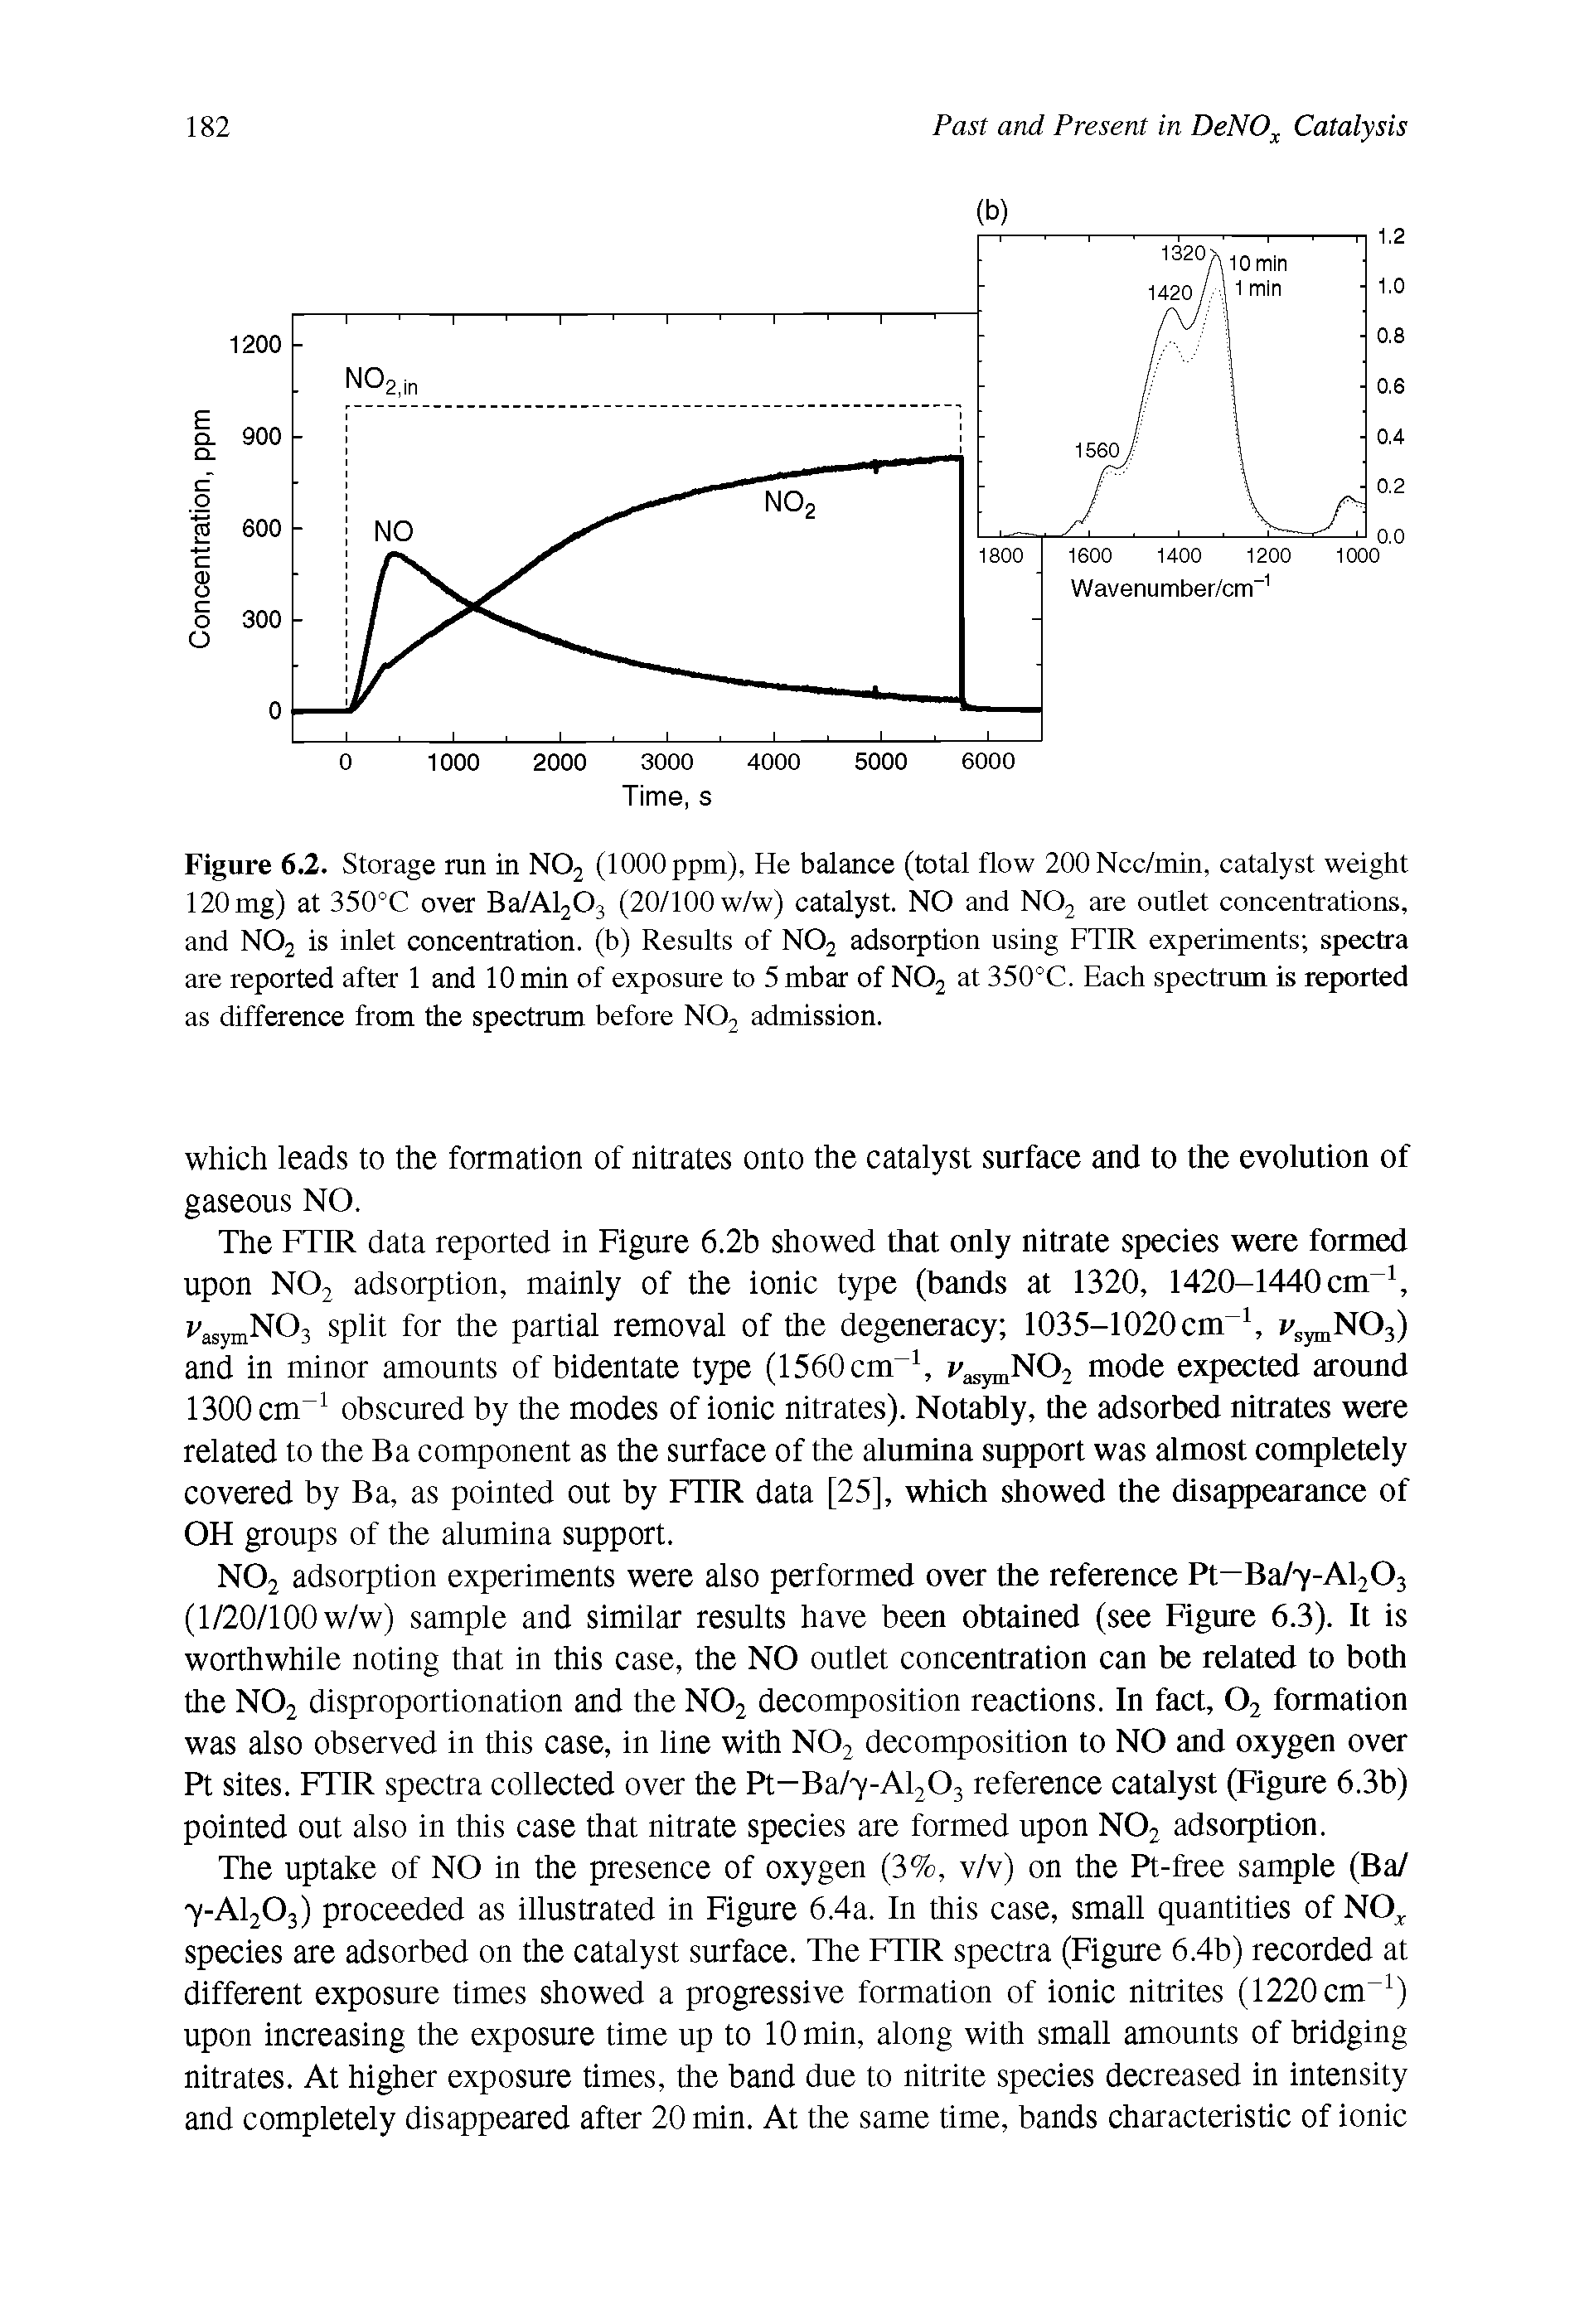 Figure 6.2. Storage run in N02 (1000 ppm), He balance (total flow 200Ncc/min, catalyst weight 120 mg) at 350°C over Ba/Al203 (20/100 w/w) catalyst. NO and N02 are outlet concentrations, and N02 is inlet concentration, (b) Results of N02 adsorption using FTIR experiments spectra are reported after 1 and 10 min of exposure to 5 mbar of N02 at 350°C. Each spectrum is reported as difference from the spectrum before N02 admission.